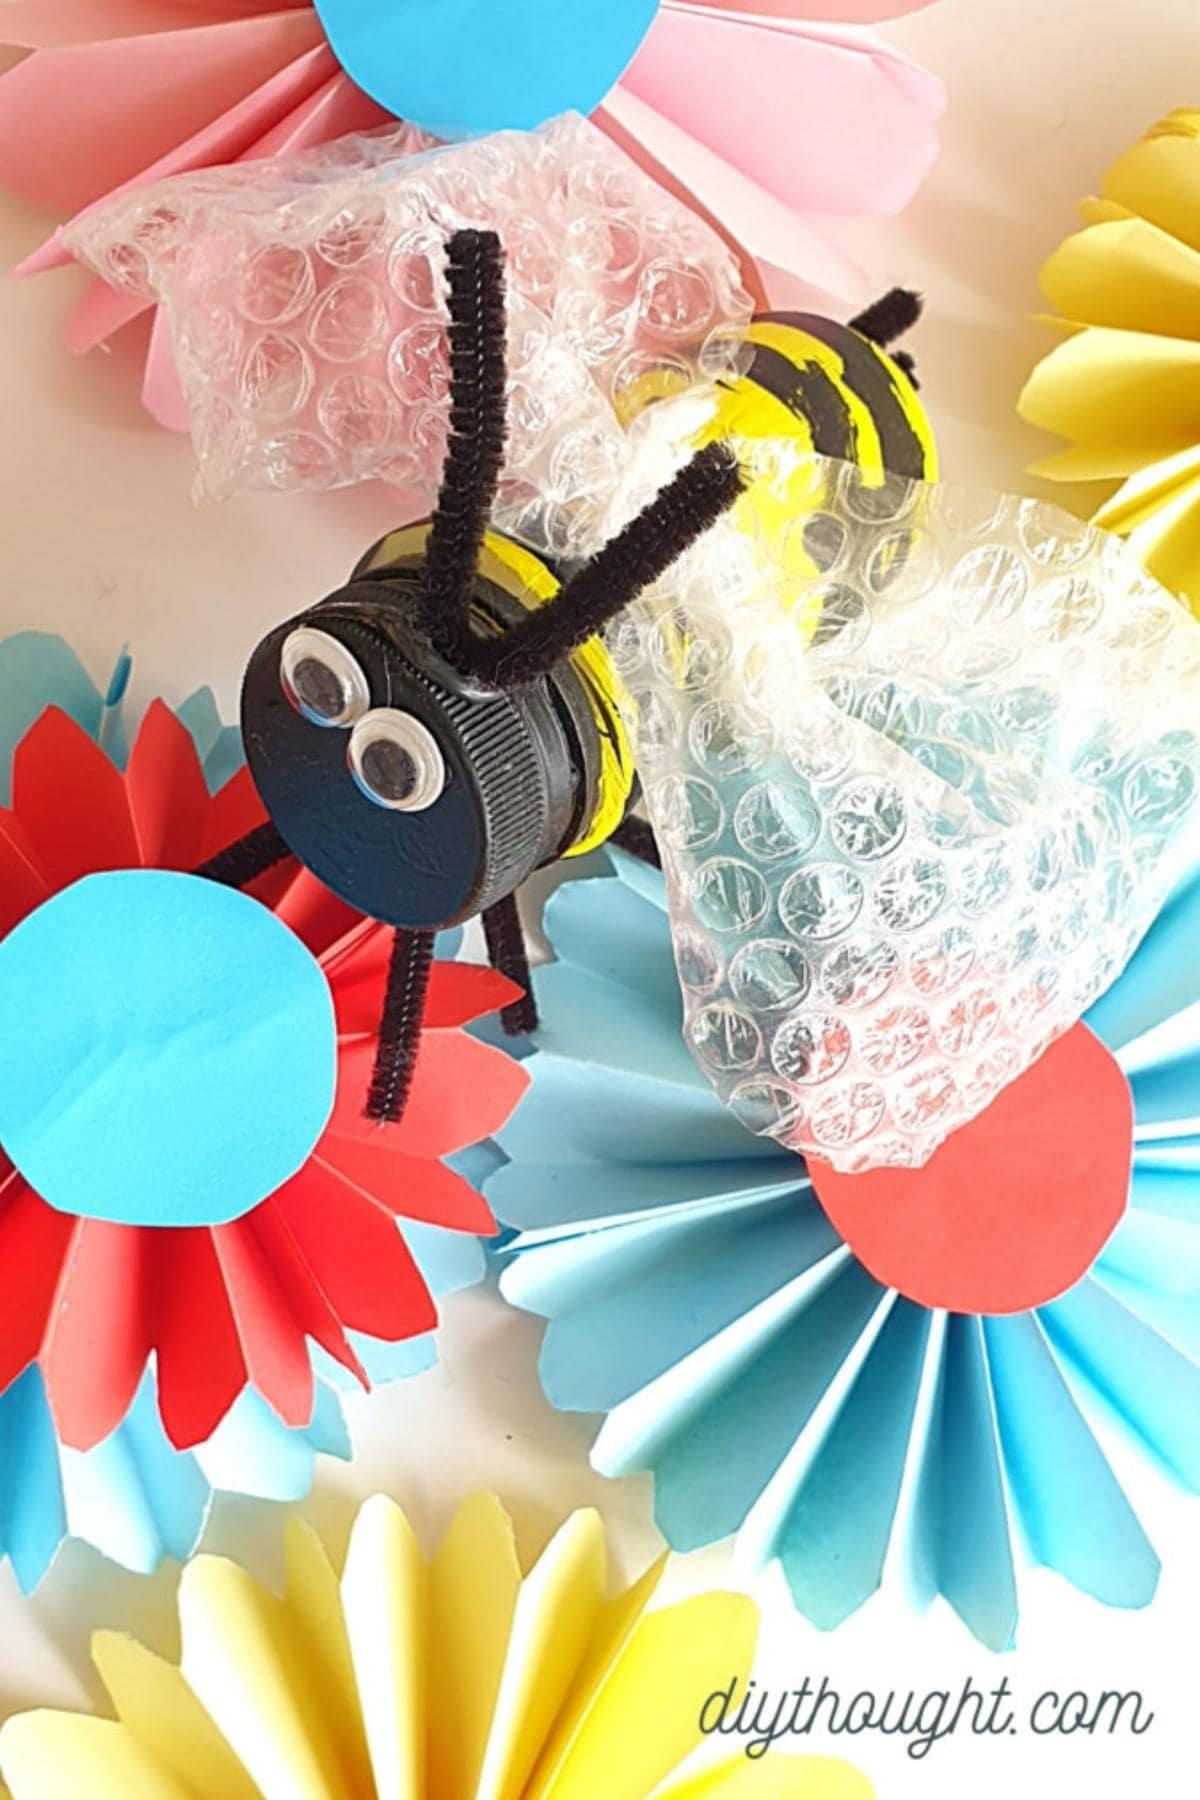 bumble bee craft ideas